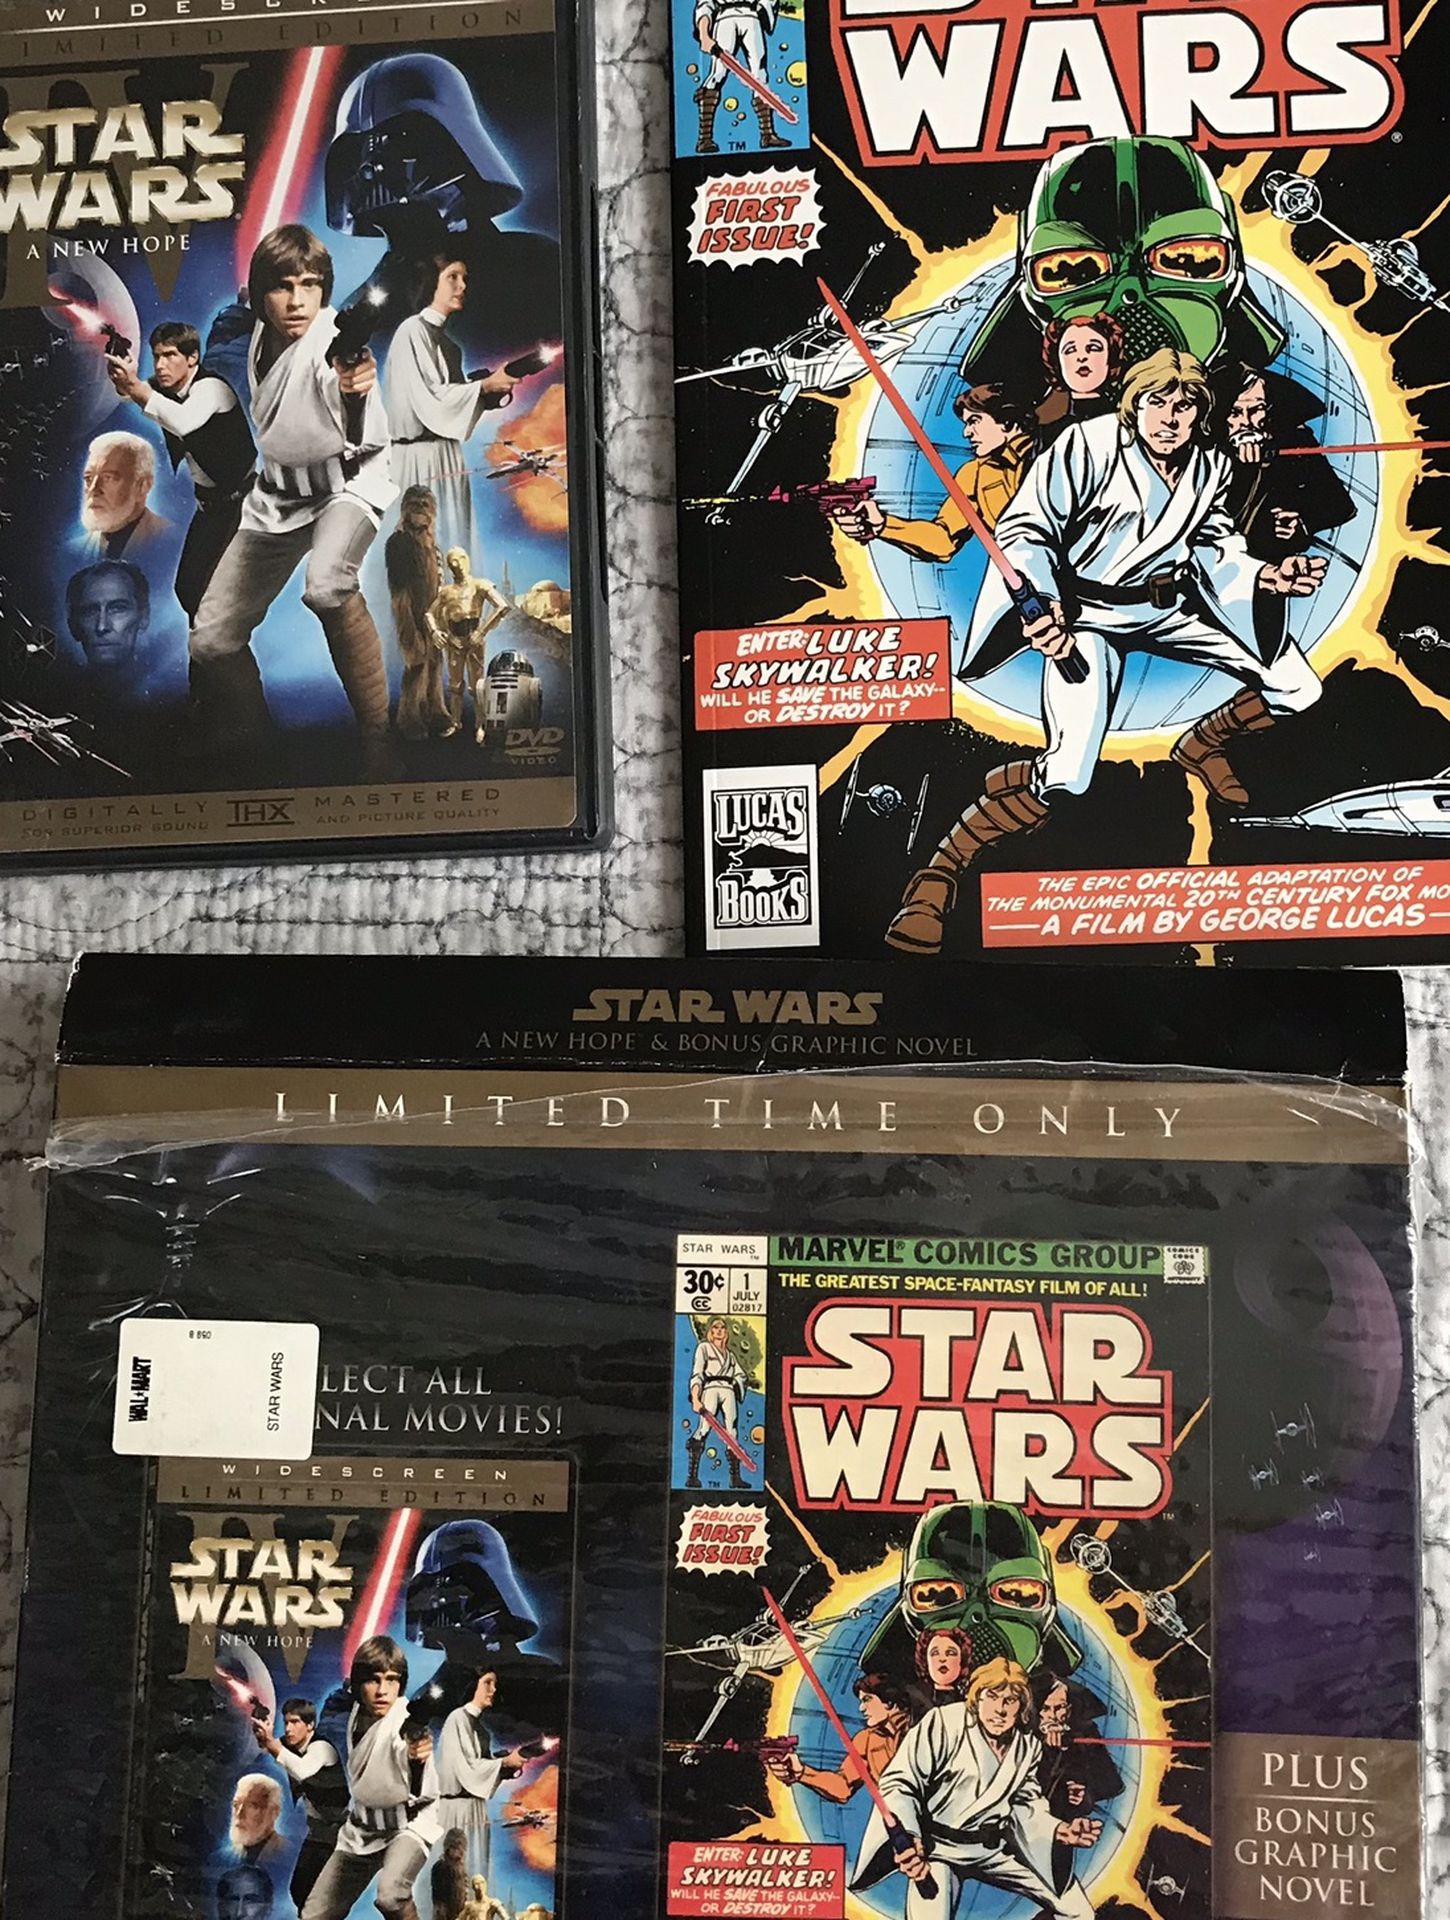 Star Wars Limited Time Only DVD